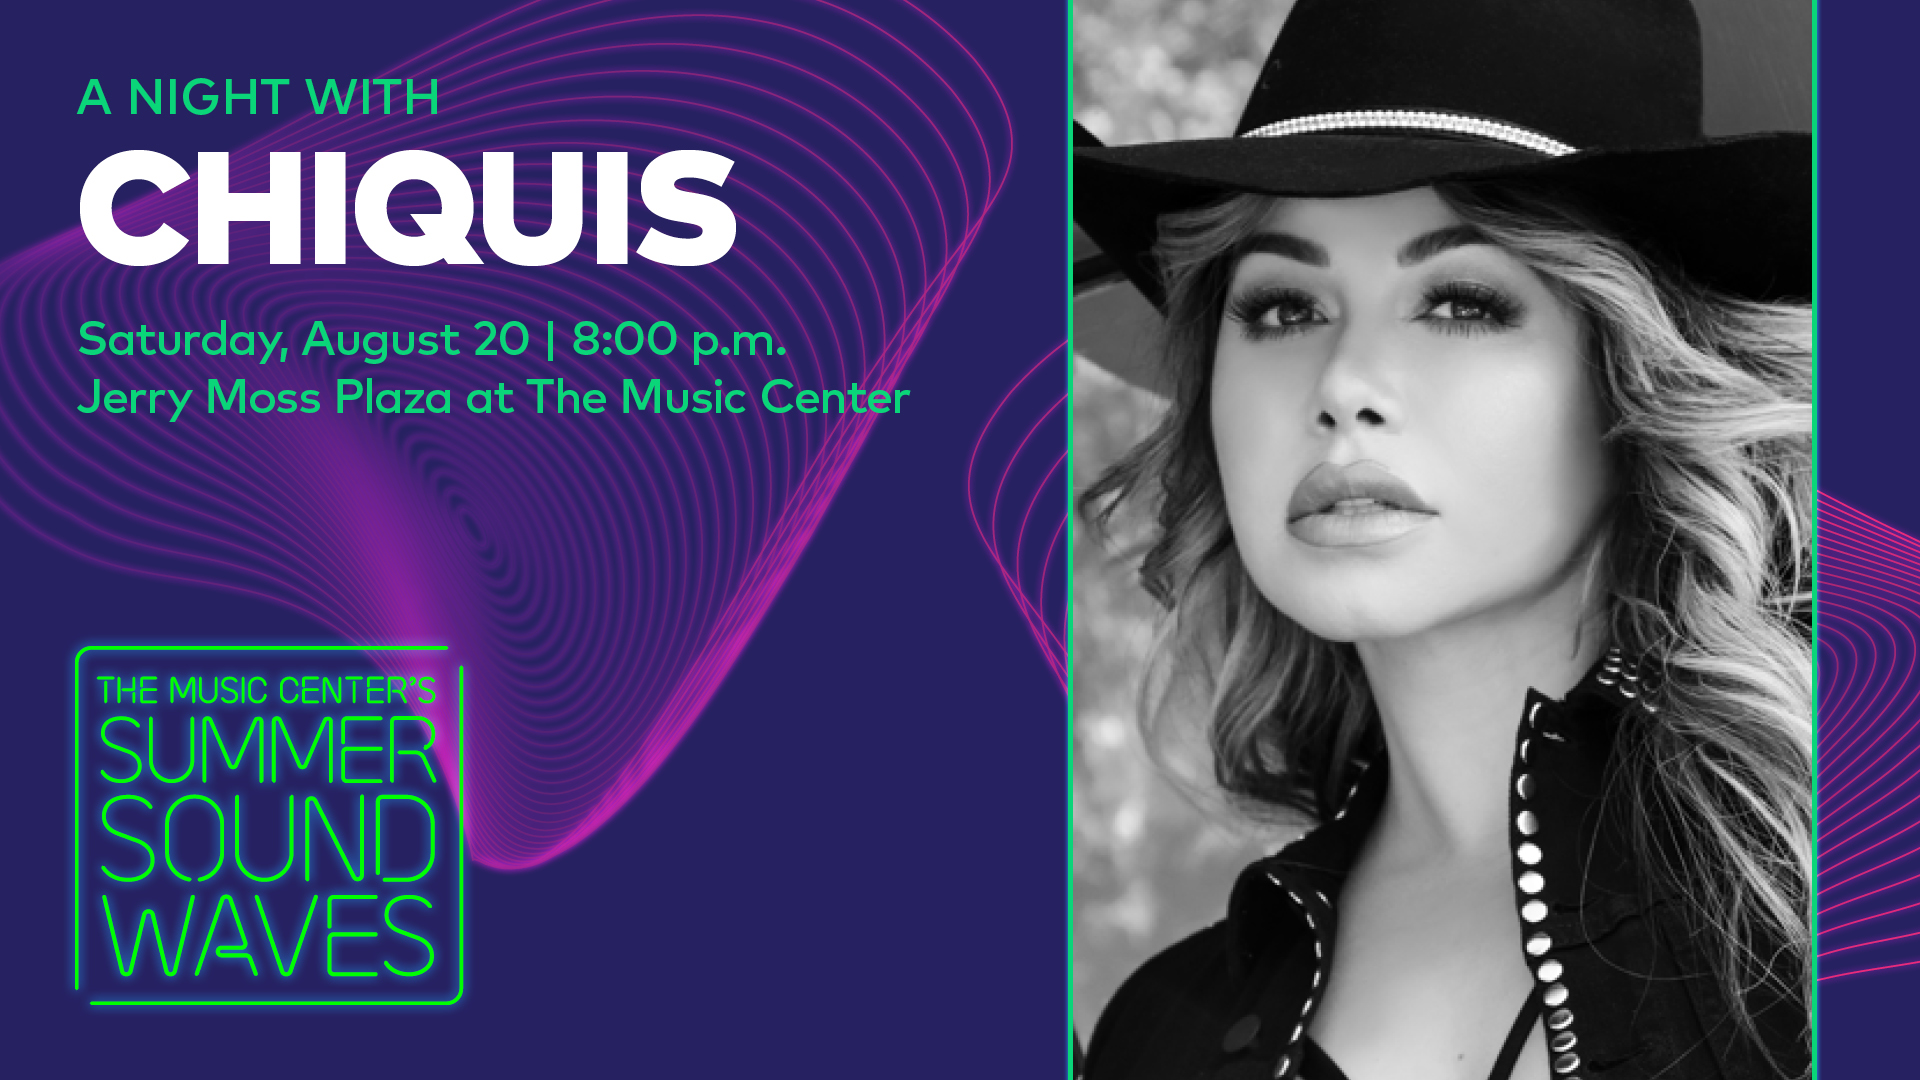 The Music Center's Summer SoundWaves feat. Chiquis